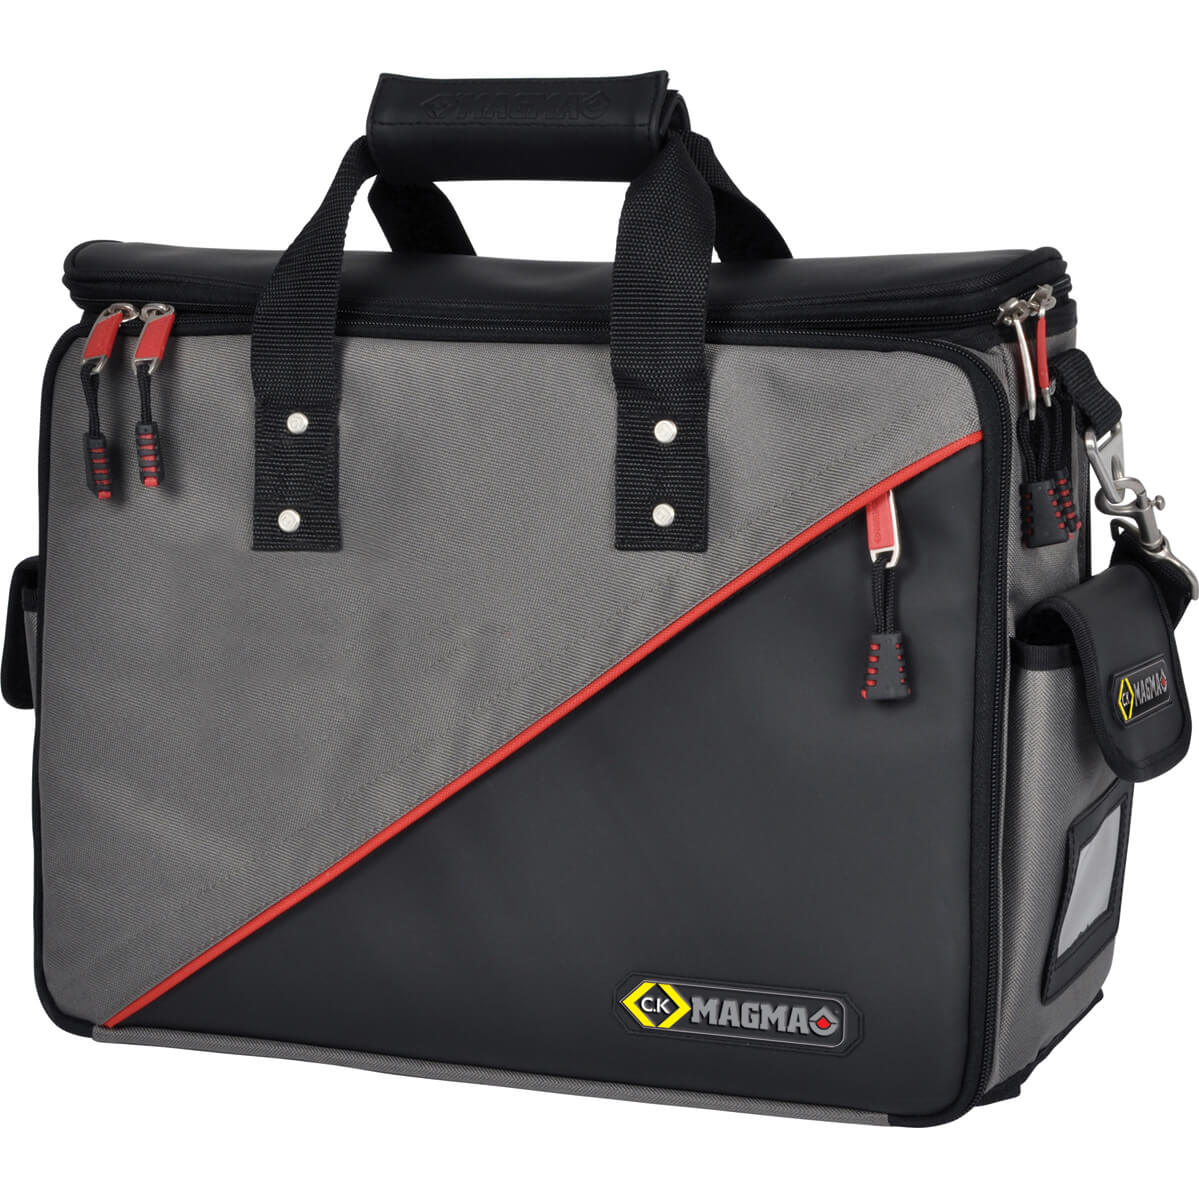 Image of CK Magma Technicians Soft Tool Case